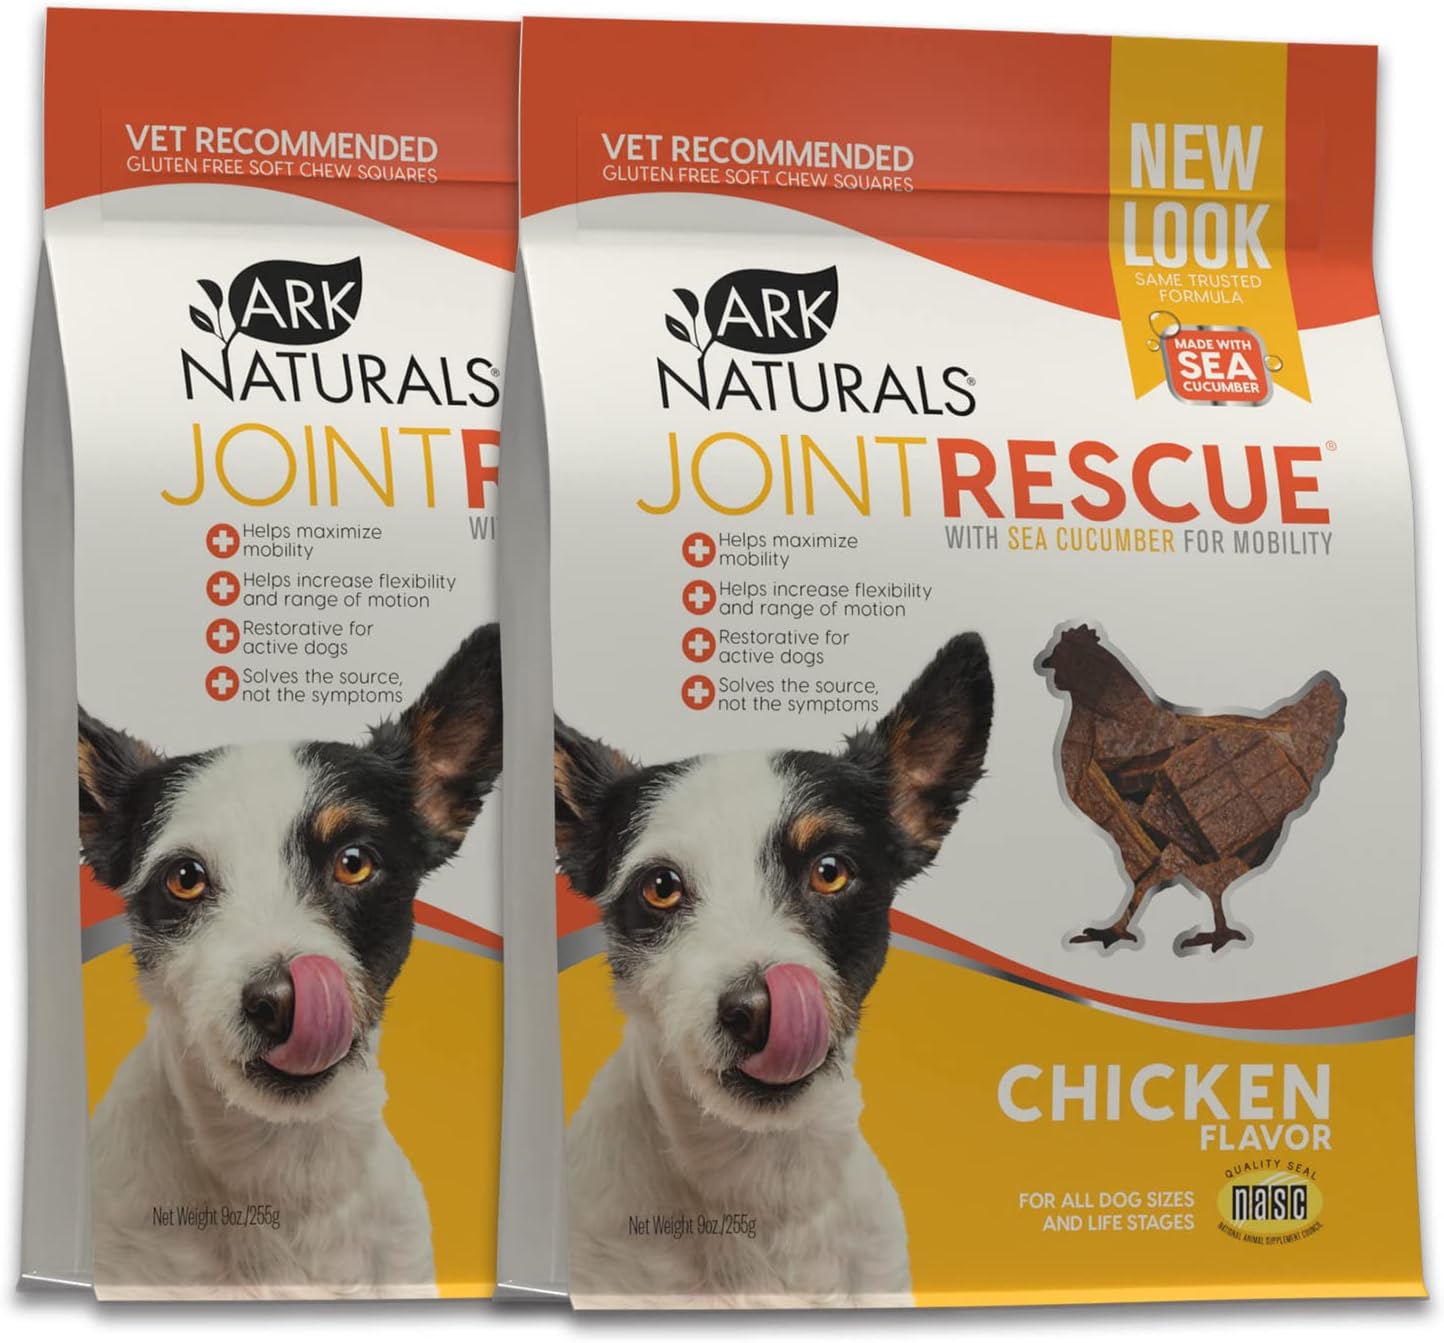 ARK NATURALS Joint Rescue Bundle Pack, Chicken Flavor, Dog Joint Supplement with Glucosamine & Chondroitin, 2 Pack